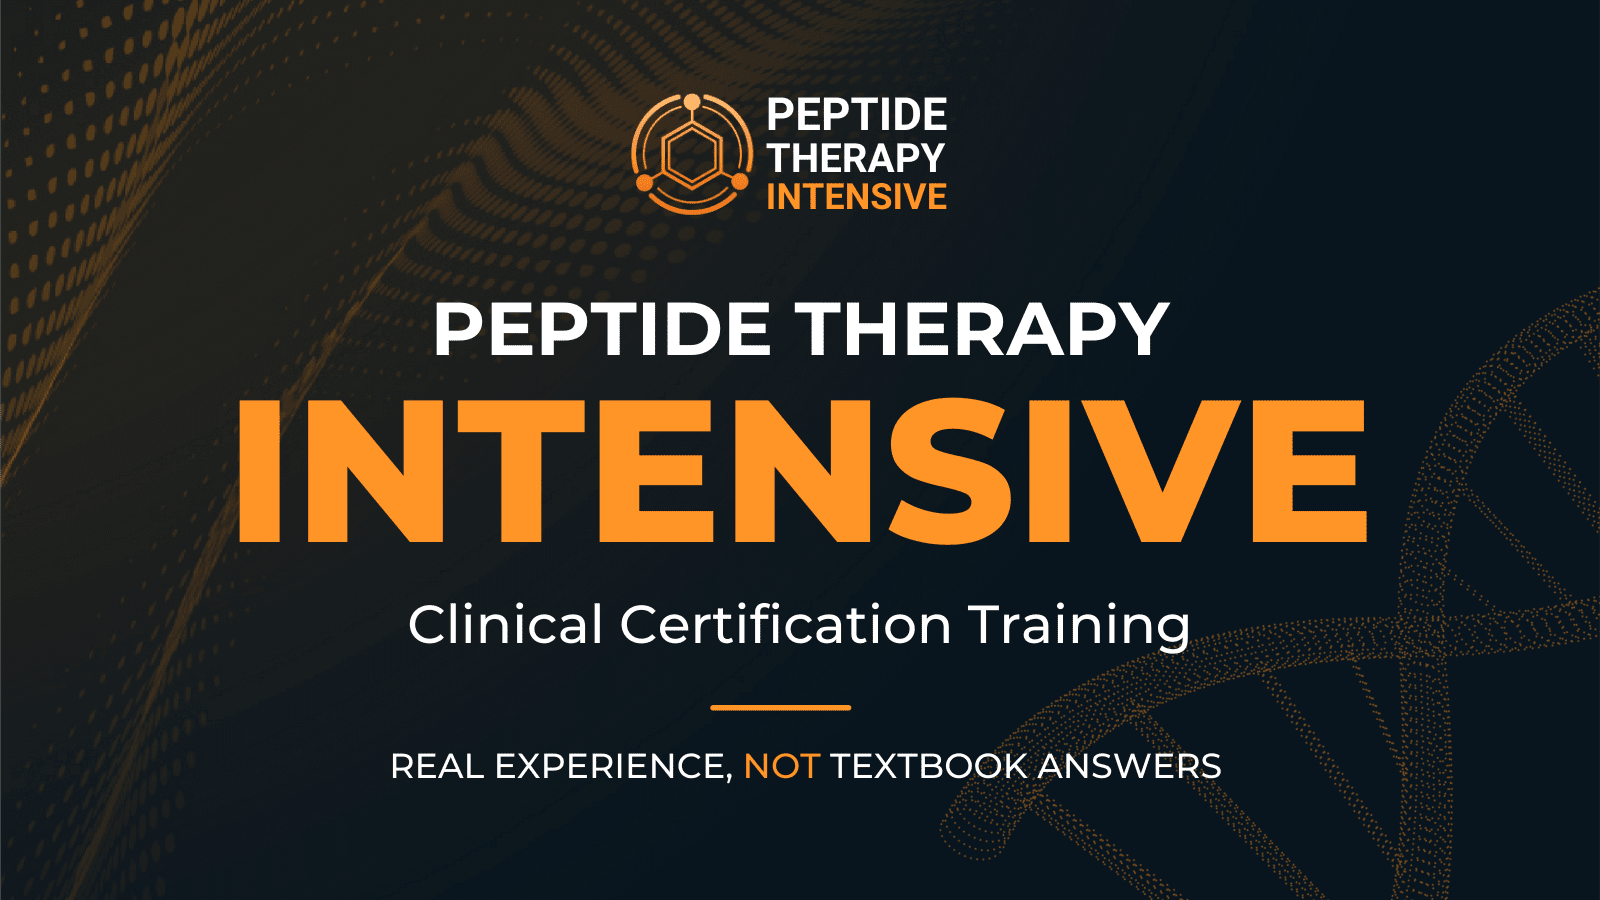 Peptide Therapy Intensive Certification